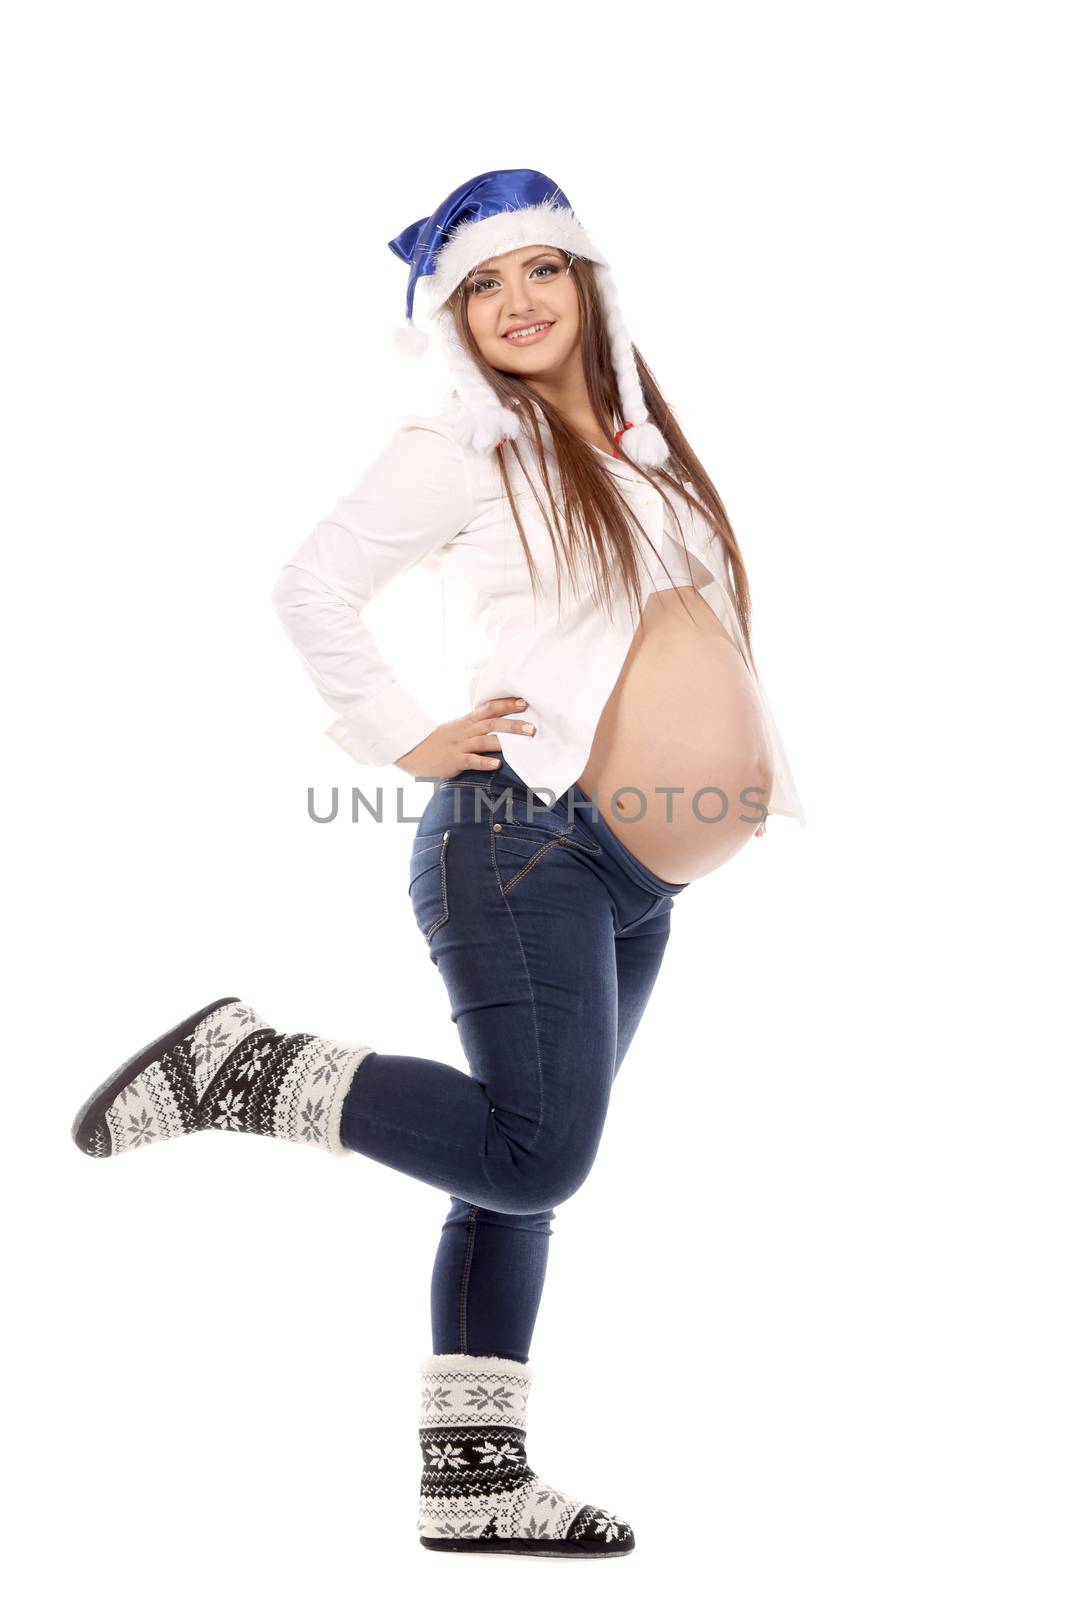 The pregnant girl in a New Year's cap. Isolated on a white background.